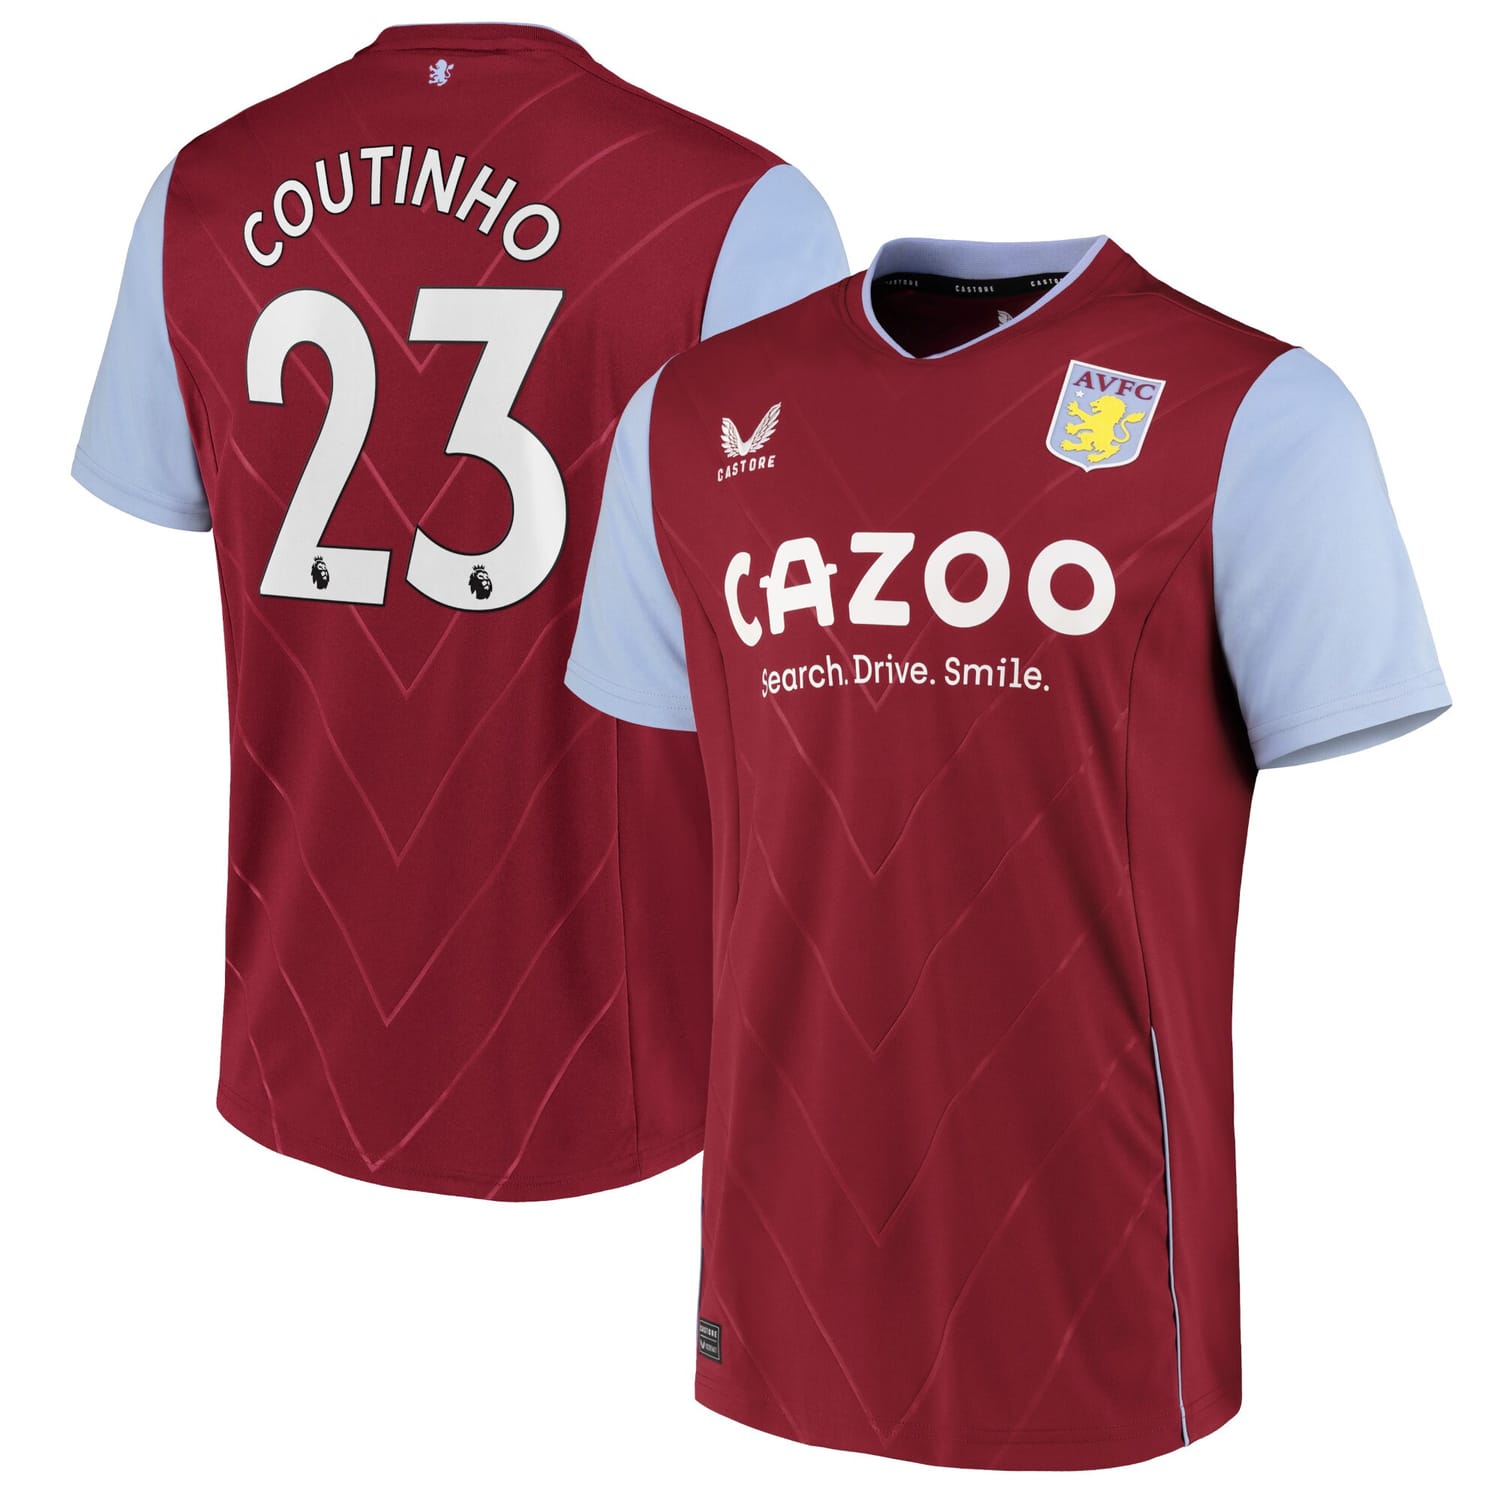 Premier League Ast. Villa Home Jersey Shirt 2022-23 player Philippe Coutinho 23 printing for Men